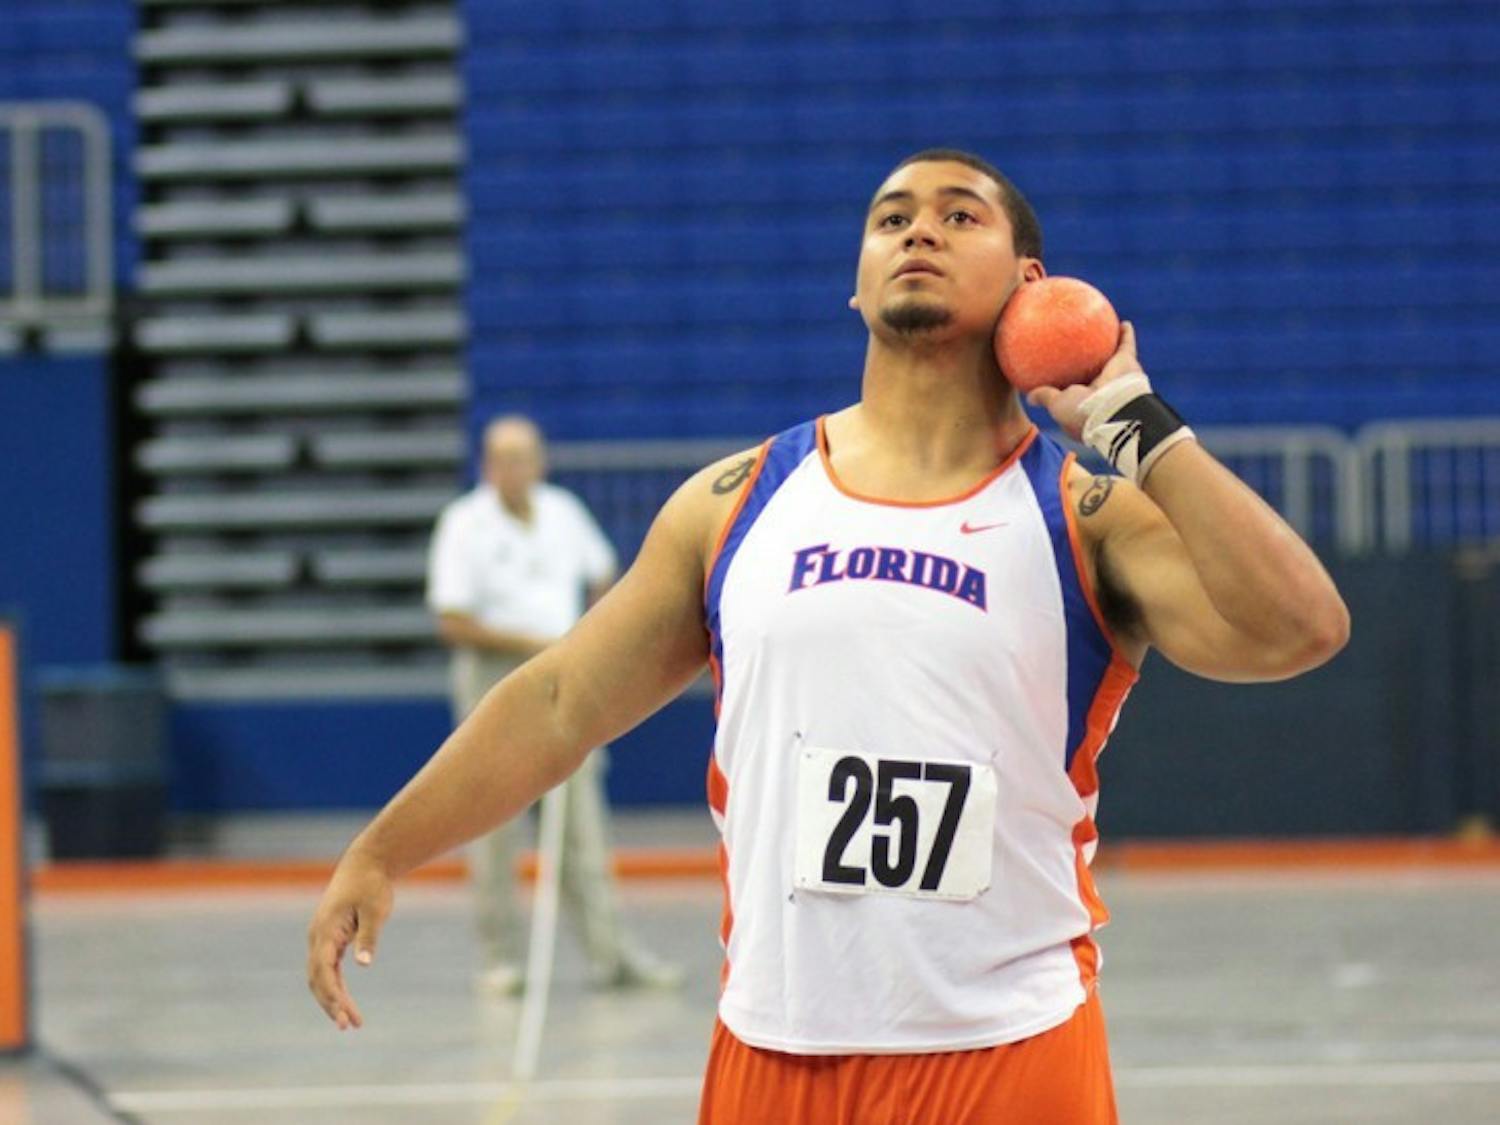 With football season over, Gators freshman fullback Hunter Joyer made his debut for the track and field team Sunday, taking home fifth in the shot put at the Gator Invite.